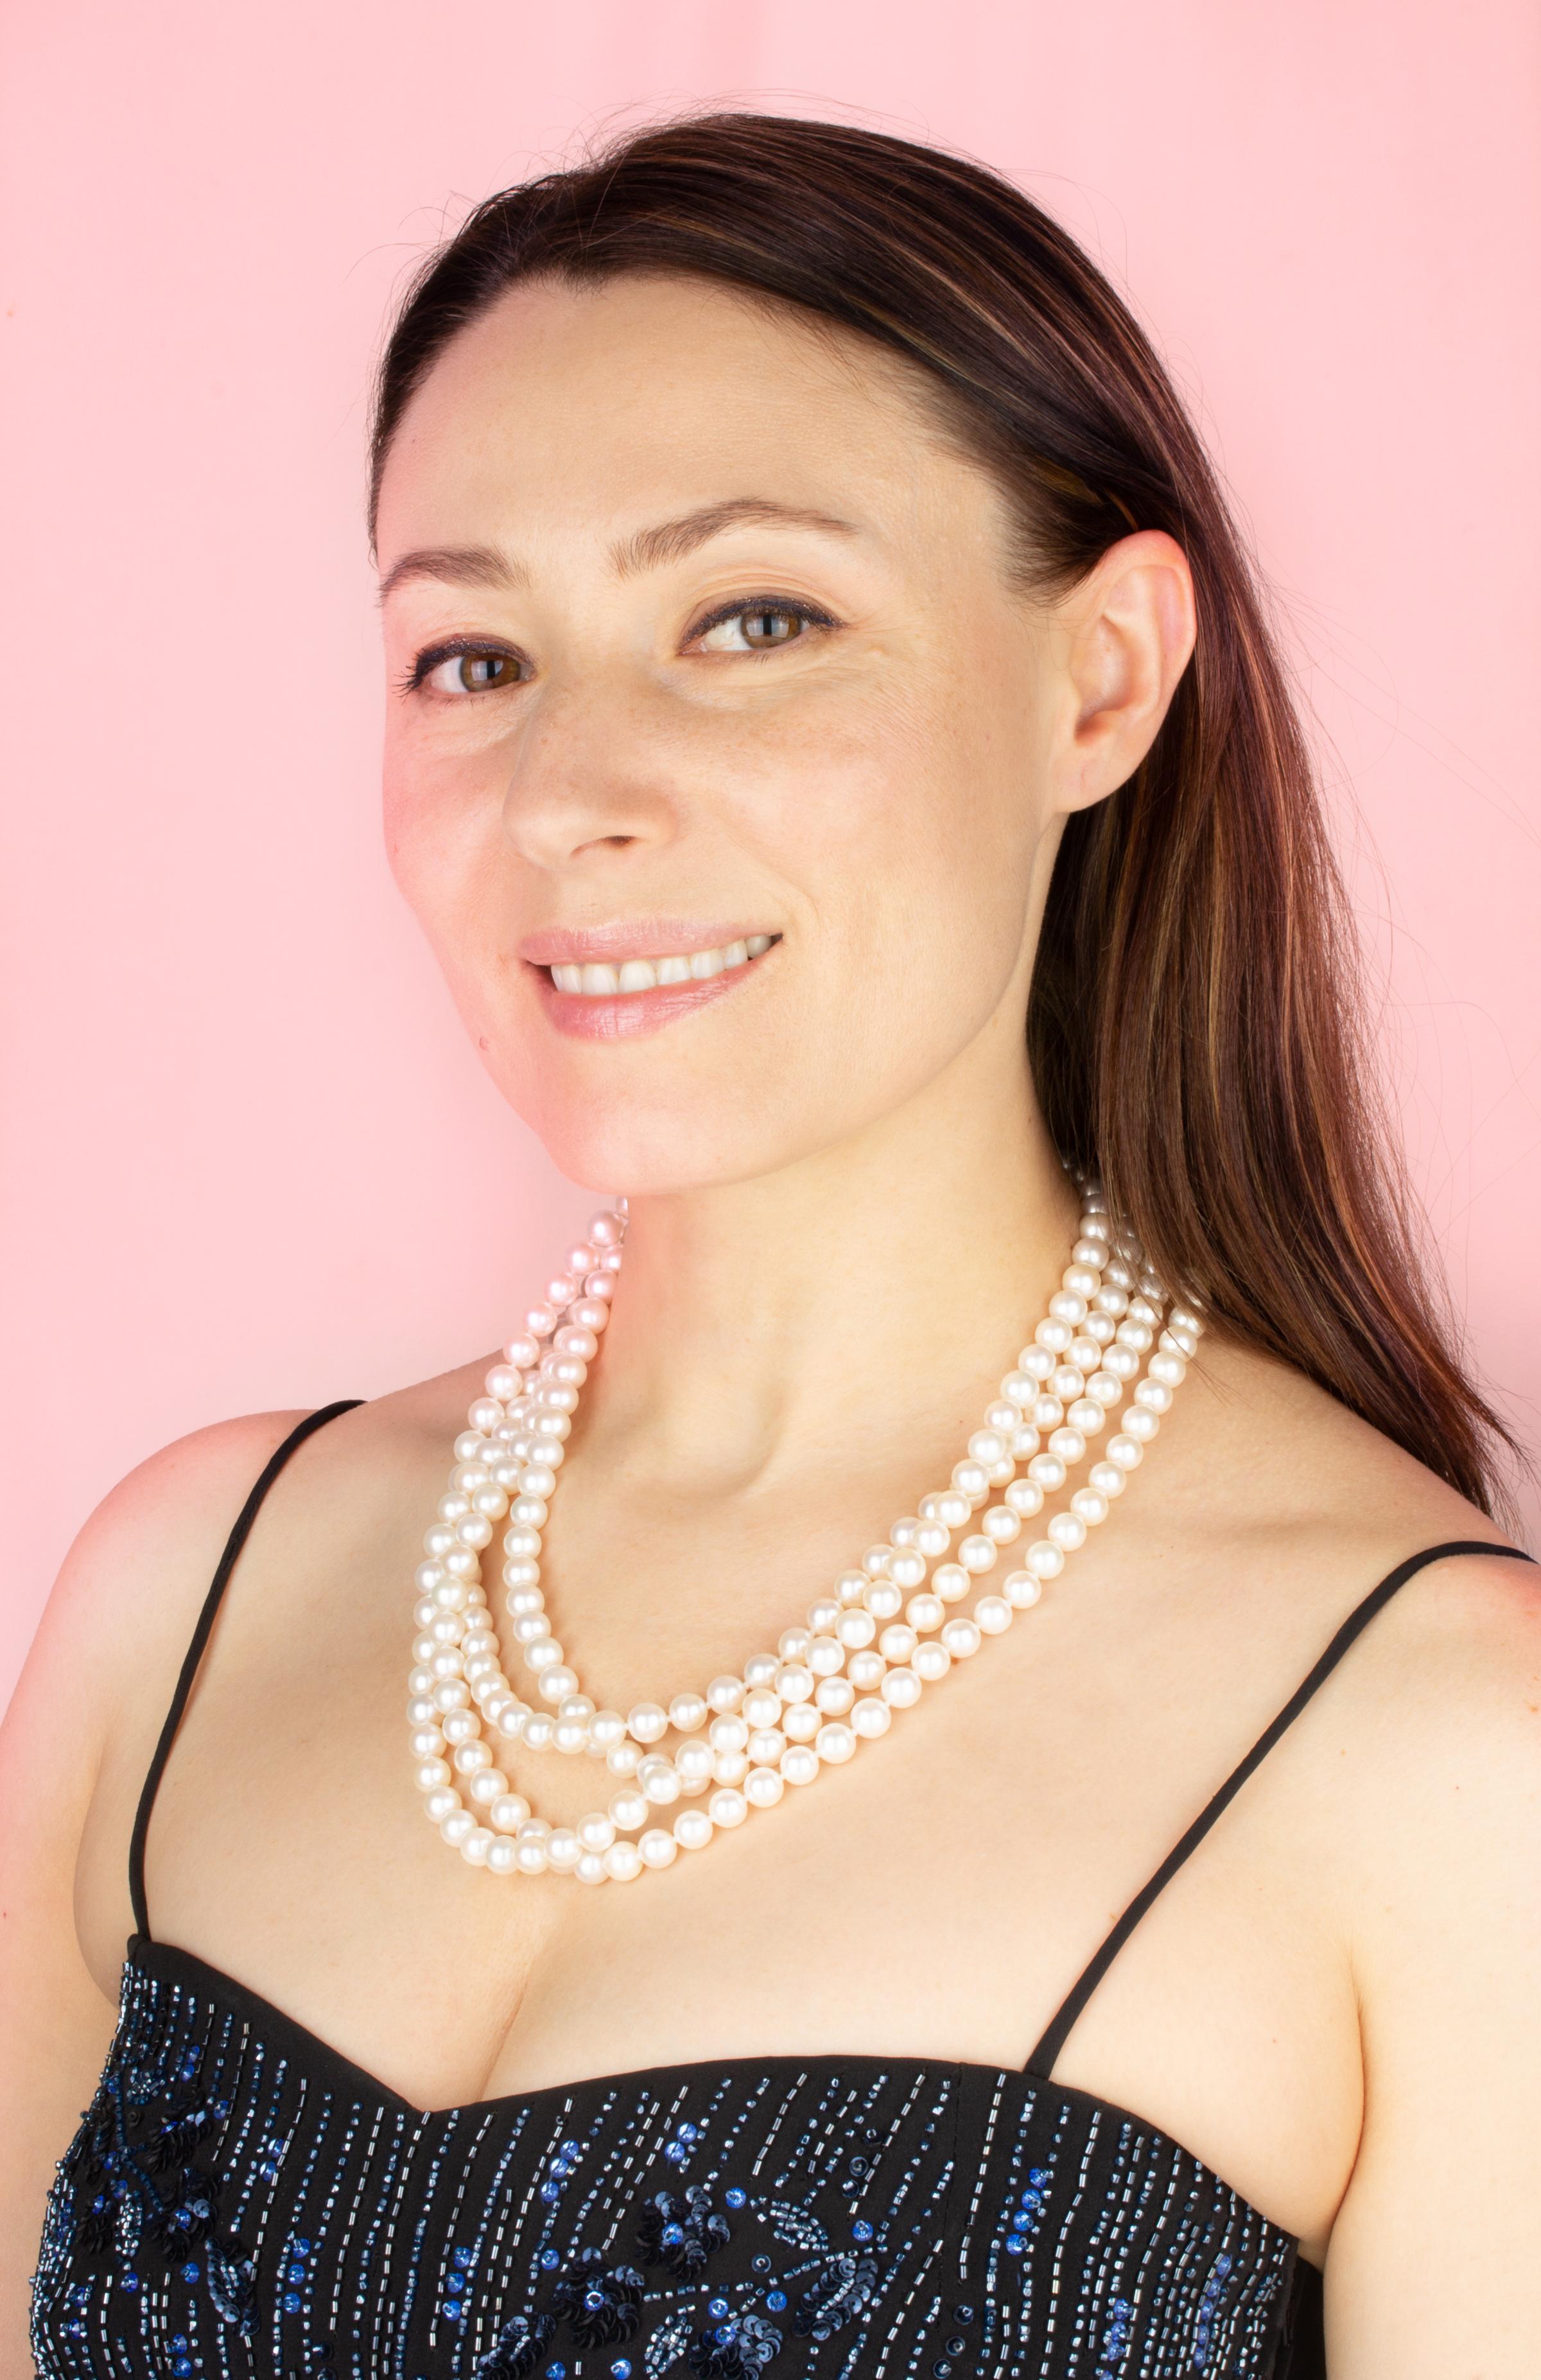 The 85” Japanese Akoya pearl necklace consists of 252 homogeneous round Japanese Akoya pearls (Pinctada Fucata) of 8mm diameter. The pearls display a lovely nacre, lustre, and iridescence. The necklace is held together by a handmade 18 carat white